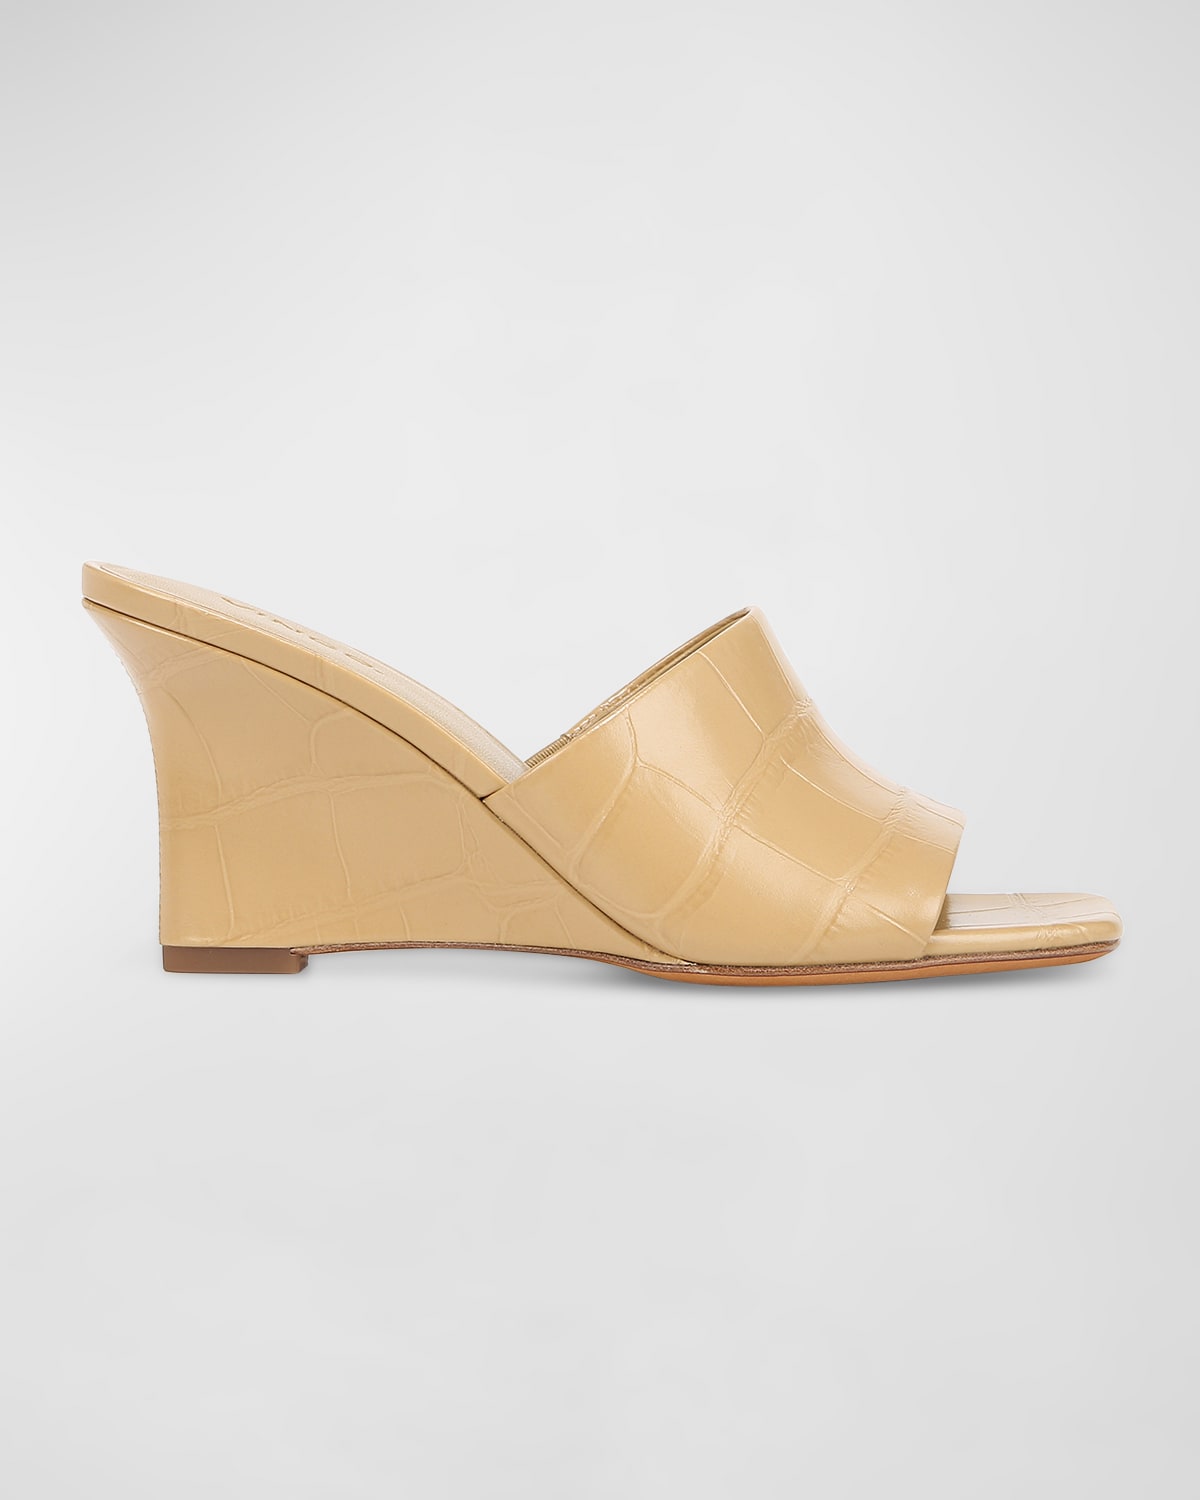 Pia Leather Wedge Slide Sandals